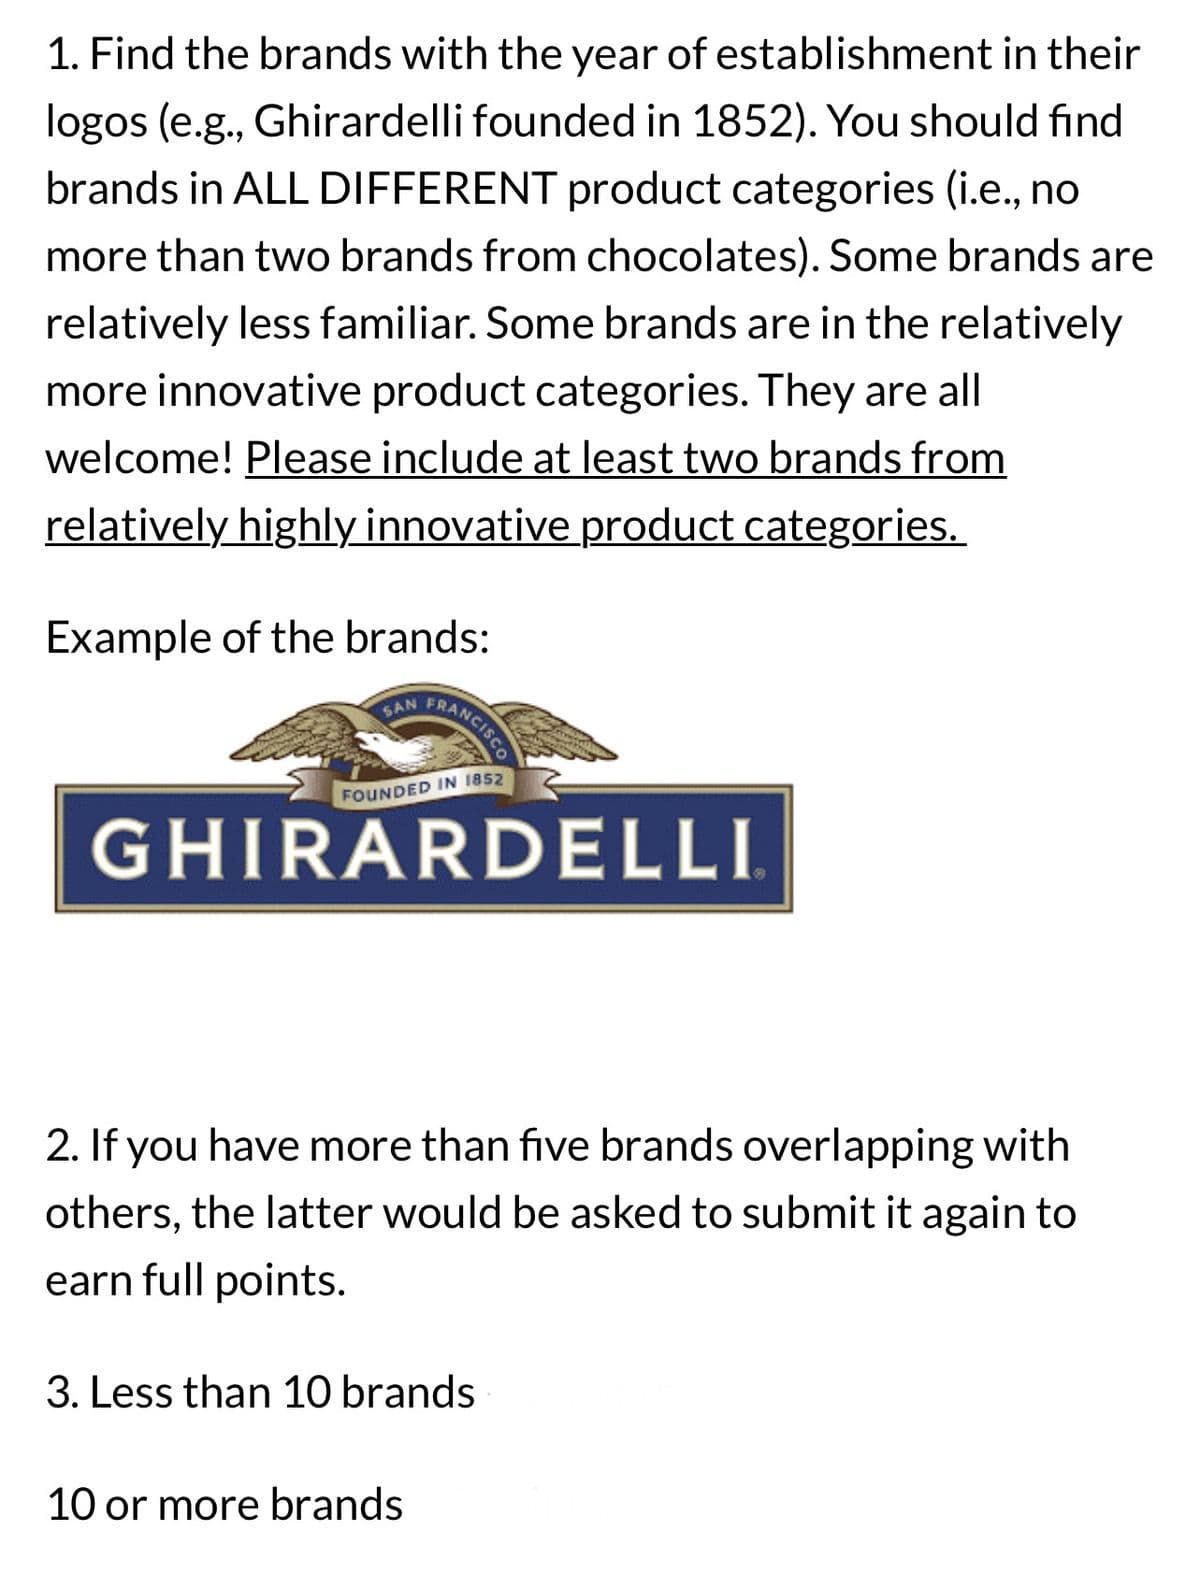 1. Find the brands with the year of establishment in their
logos (e.g., Ghirardelli founded in 1852). You should find
brands in ALL DIFFERENT product categories (i.e., no
more than two brands from chocolates). Some brands are
relatively less familiar. Some brands are in the relatively
more innovative product categories. They are all
welcome! Please include at least two brands from
relatively highly innovative product categories.
Example of the brands:
SAN
FRANCISCO
FOUNDED IN 1852
GHIRARDELLI
2. If you have more than five brands overlapping with
others, the latter would be asked to submit it again to
earn full points.
3. Less than 10 brands
10 or more brands